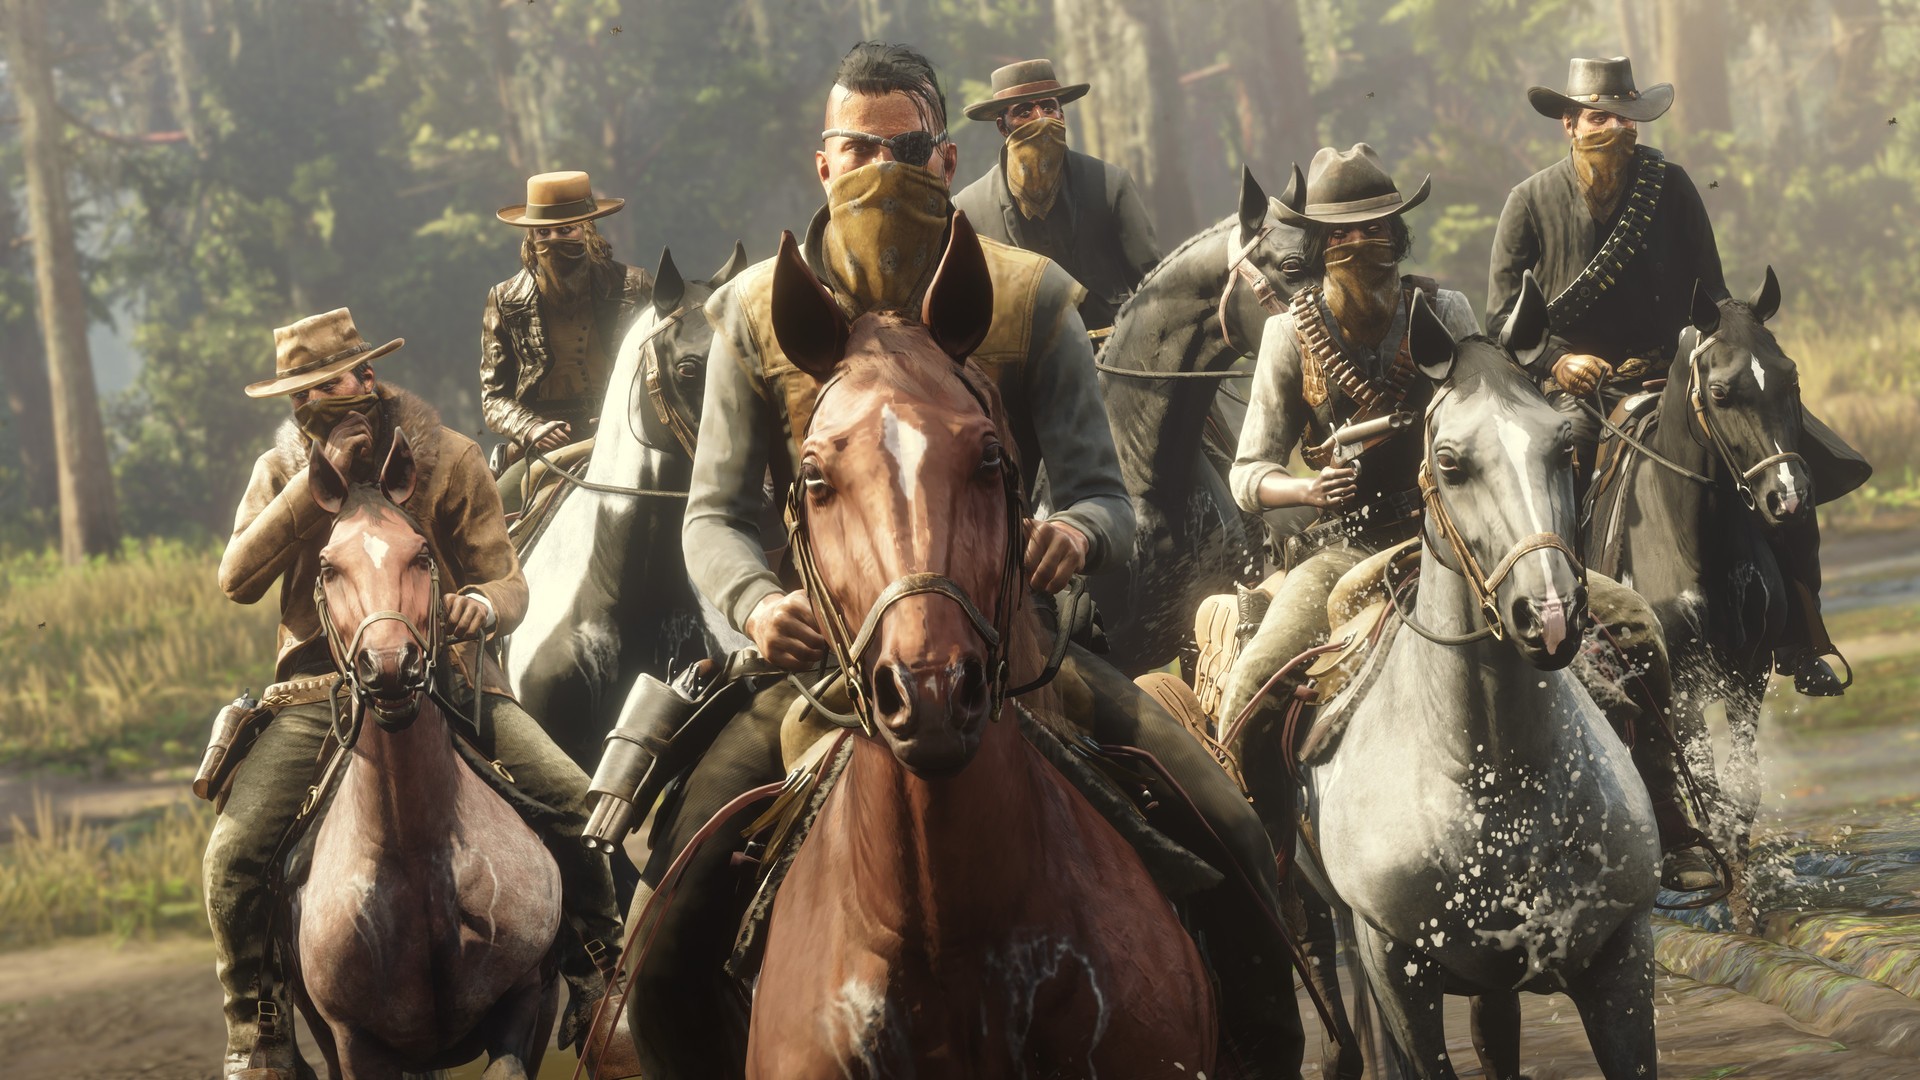 Rockstar snubs PC with baffling Red Dead Redemption 1 port that's only  coming to Switch and PS4